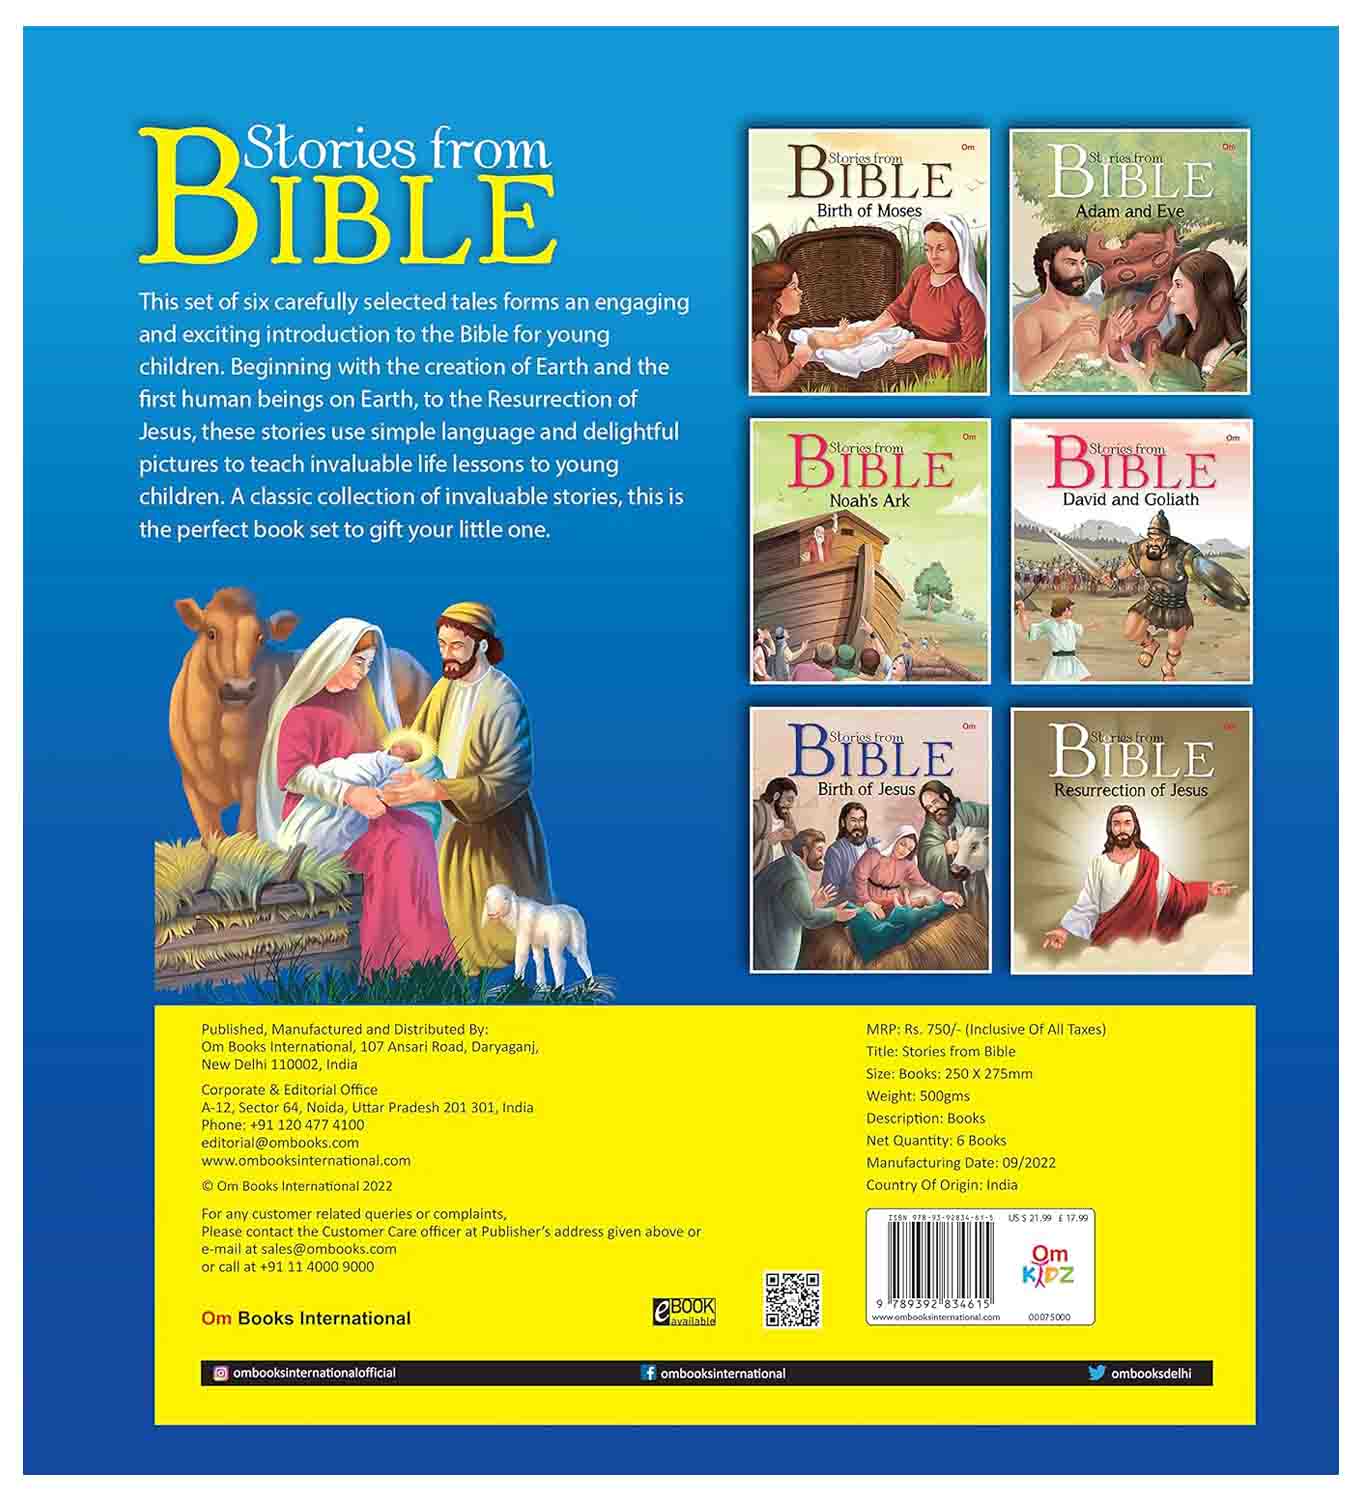 Om Books International Stories From Bible Set of 6 Books